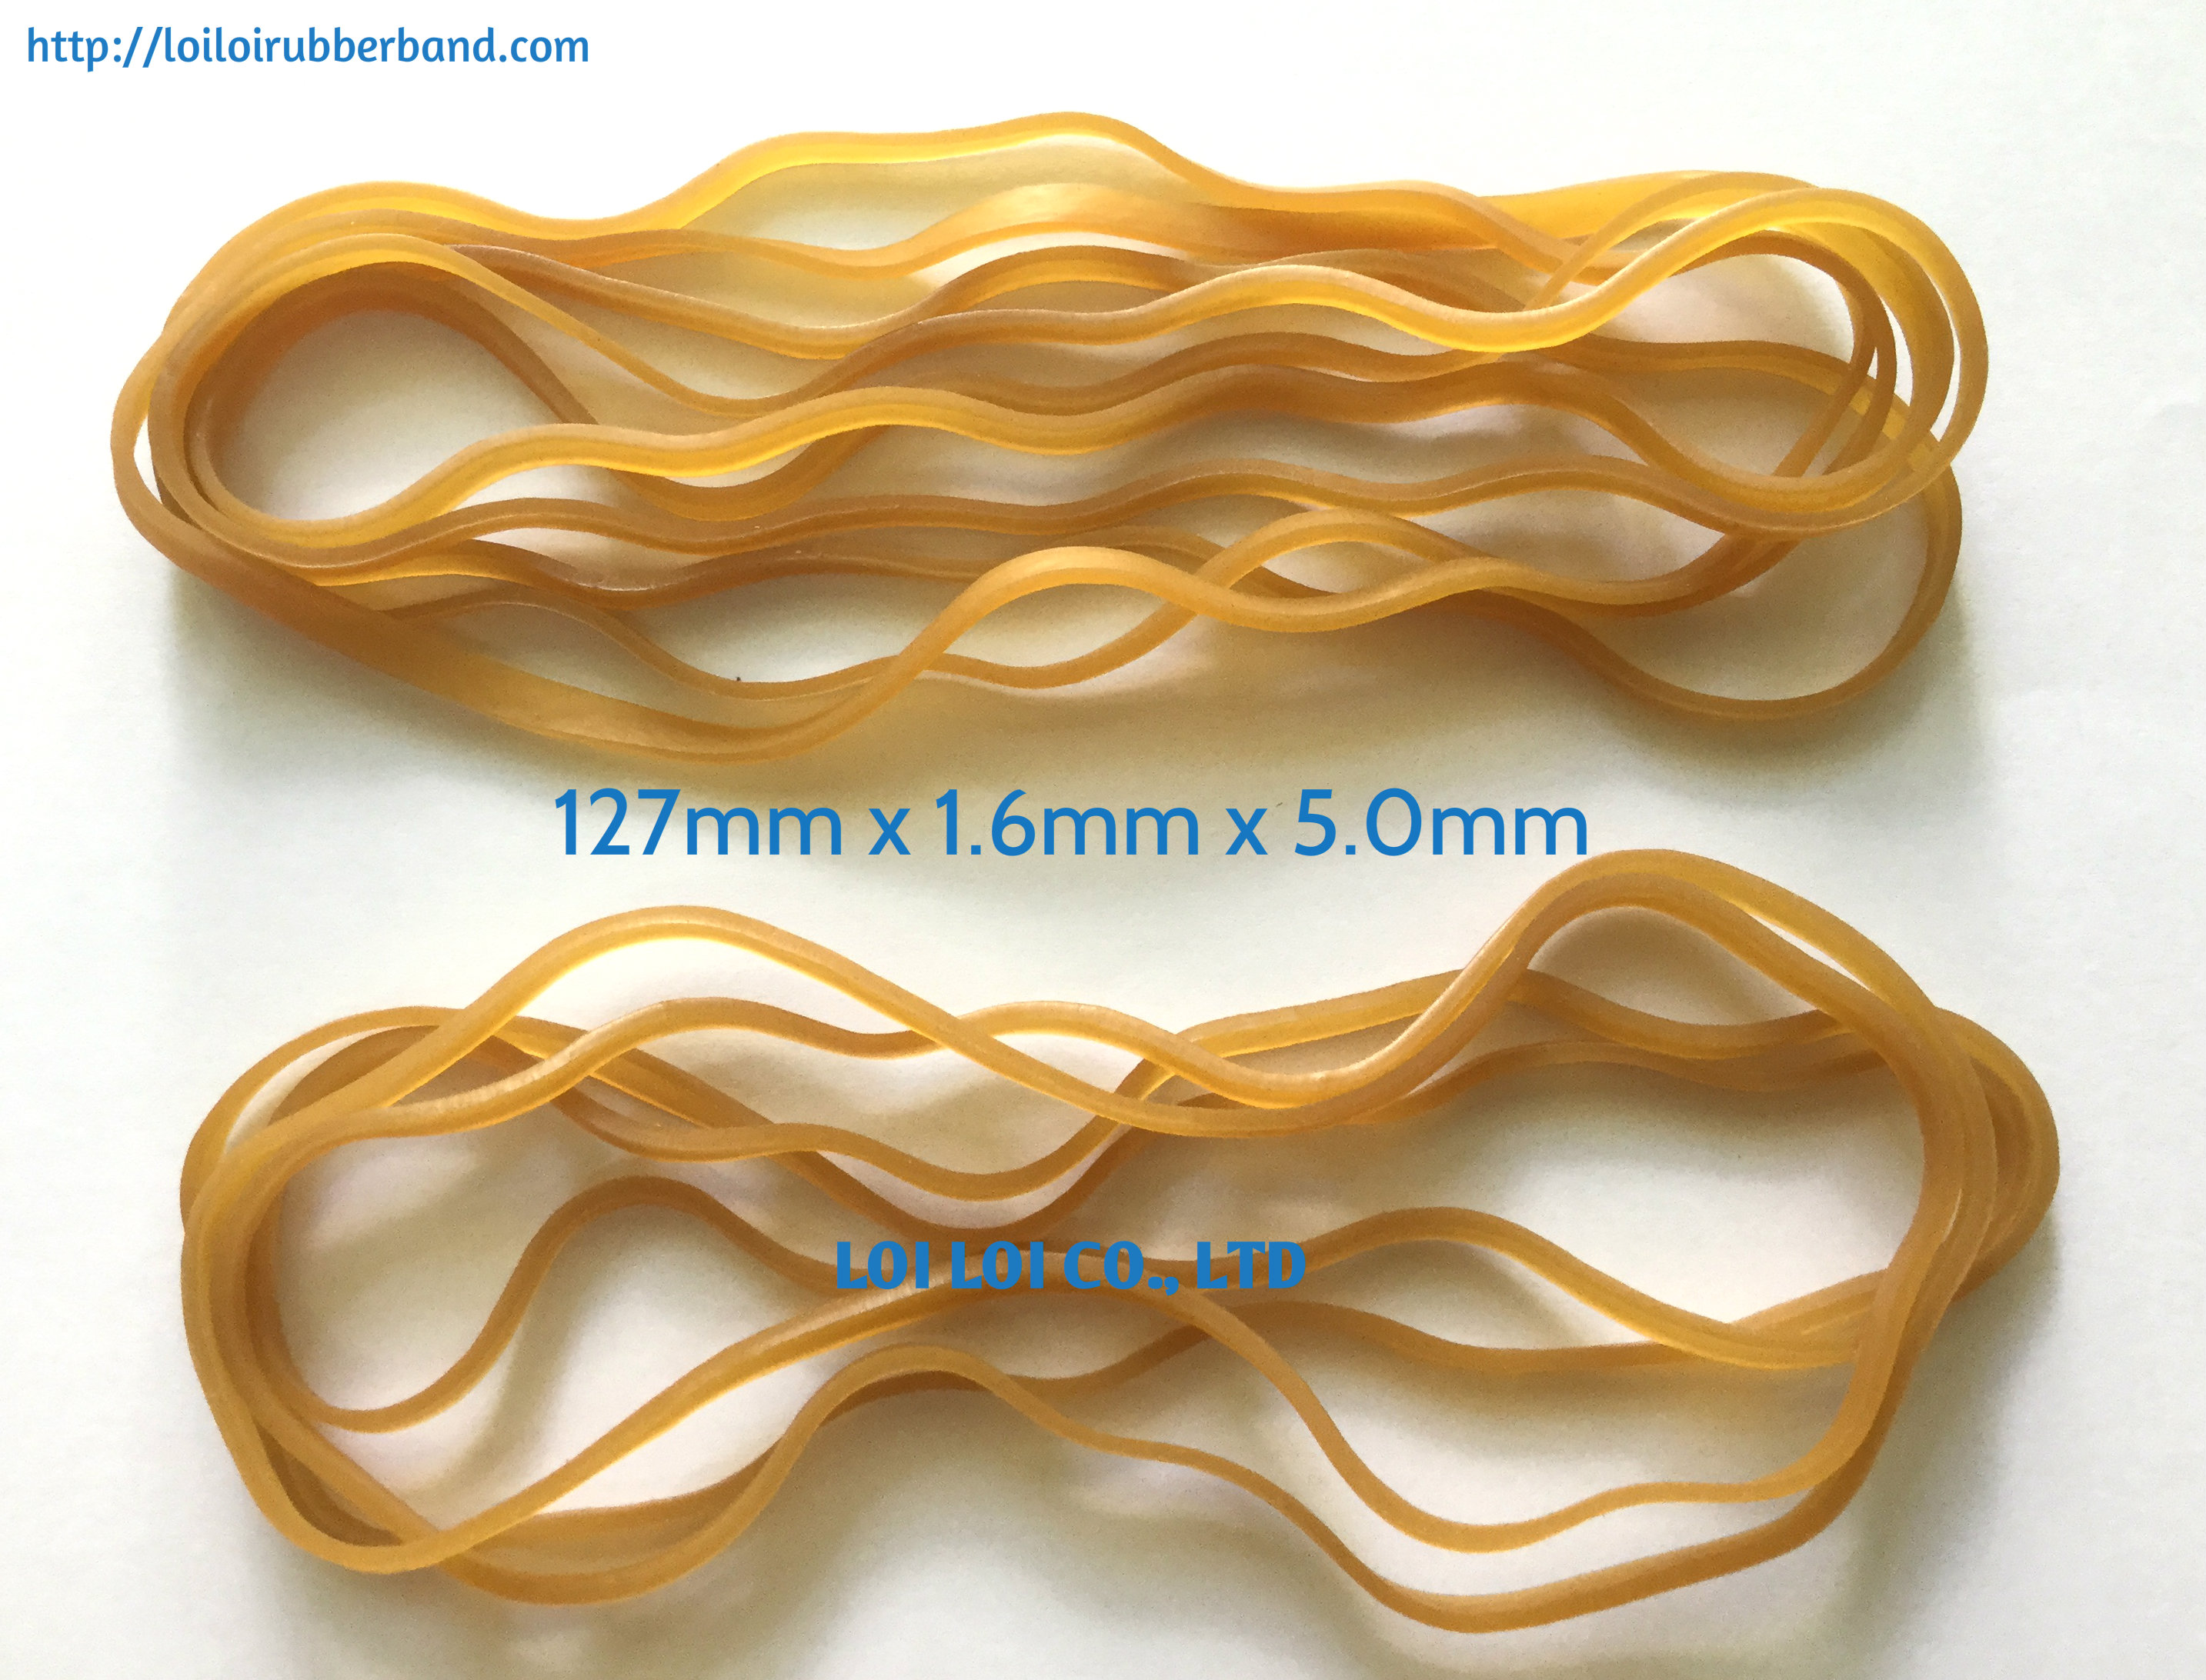 Wide and Thick Durable Rubber band